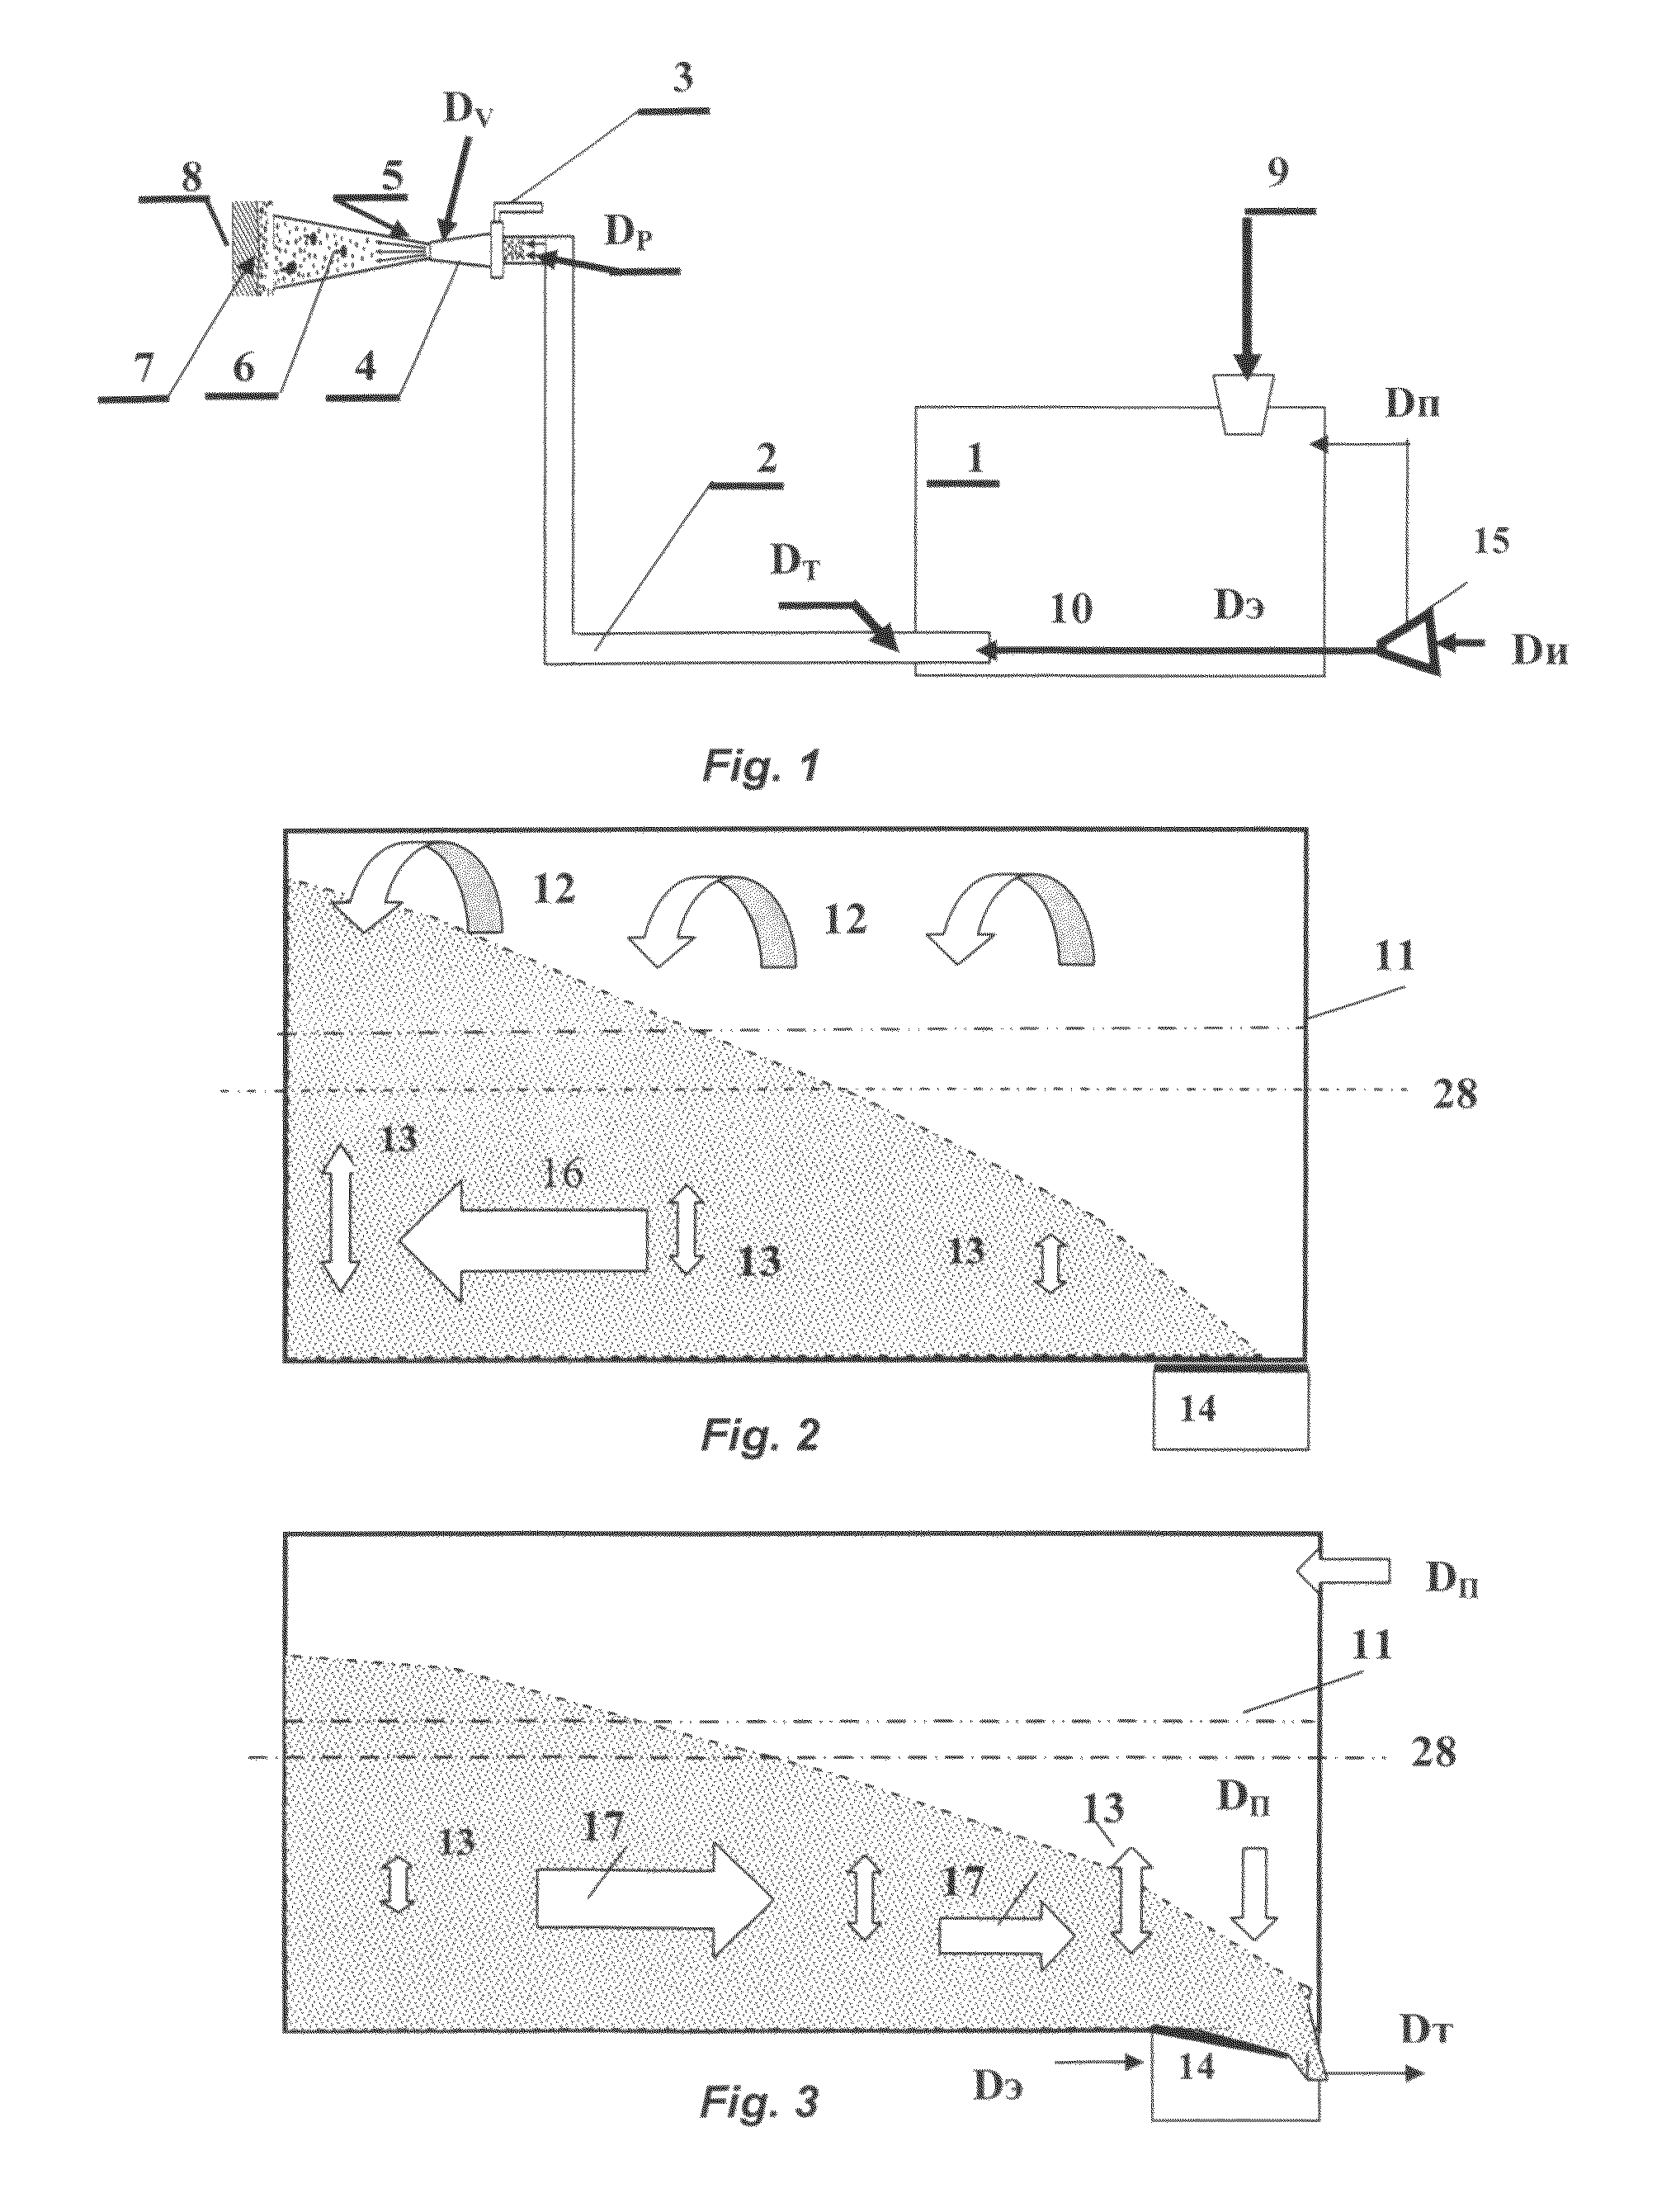 Method and apparatus for preparing and inertial placing with compacting a concrete mix